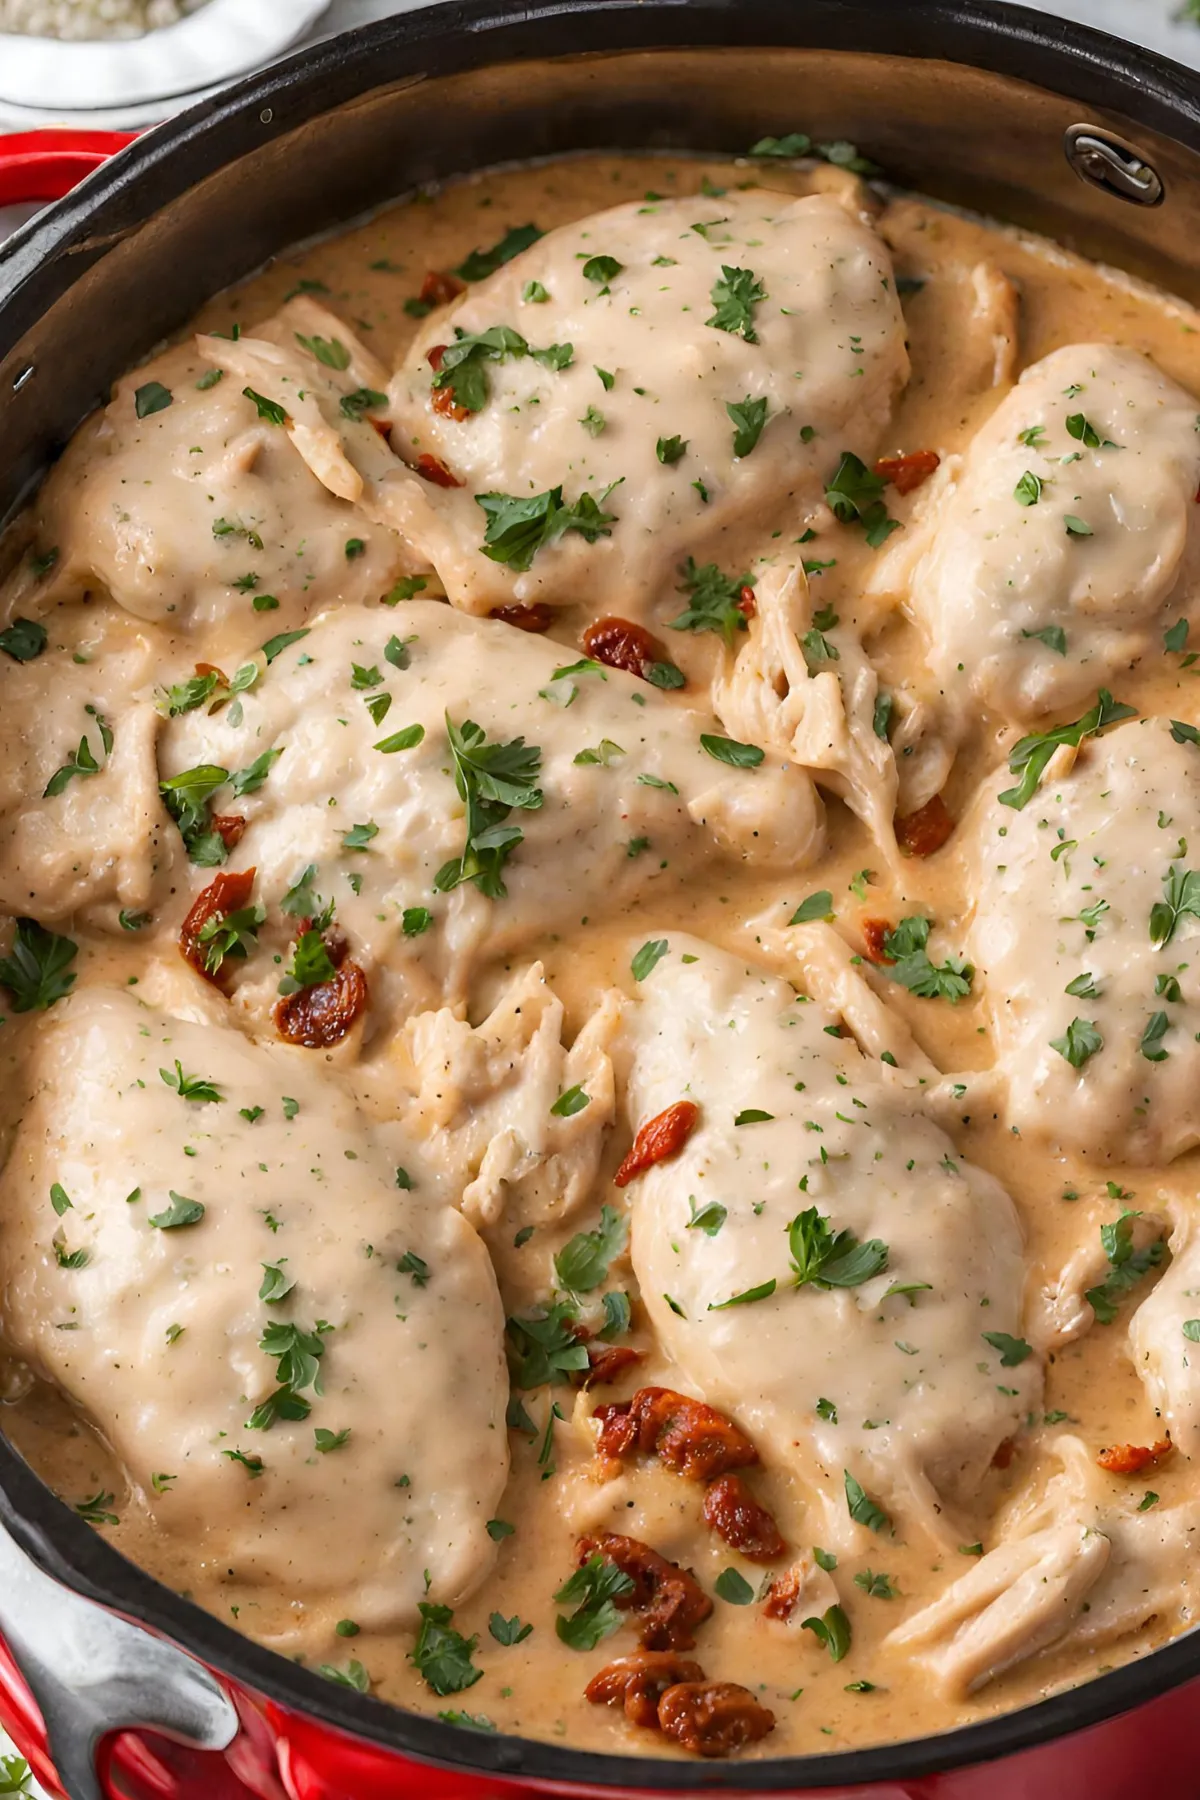 Storage and Reheating Tips for Marry Me Chicken